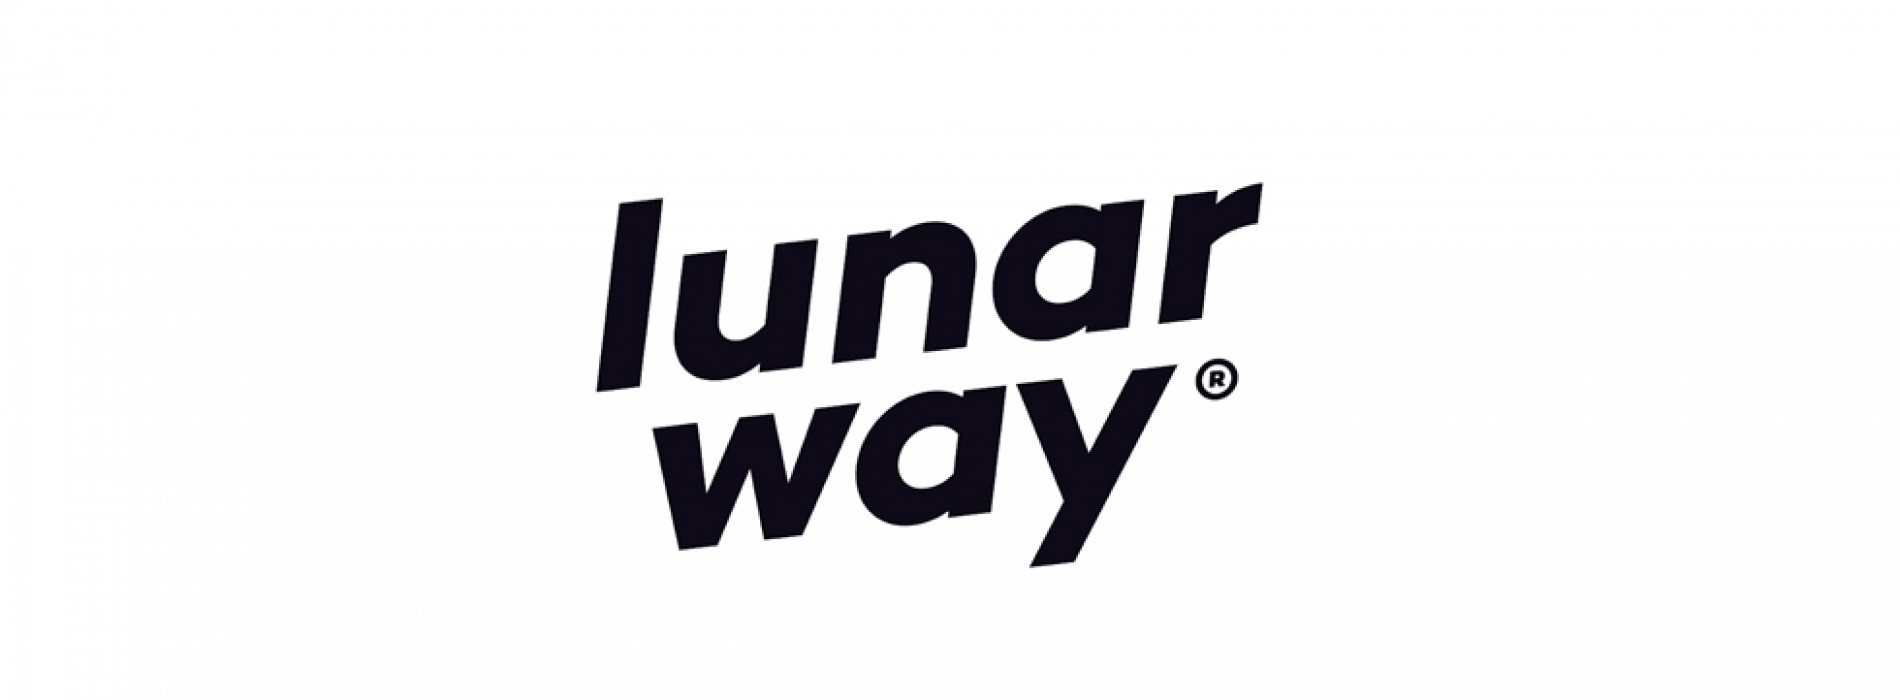 Neo-bank Lunar Way launches ‘Travel Card’ allowing Danish tourists to avoid overseas spending fees